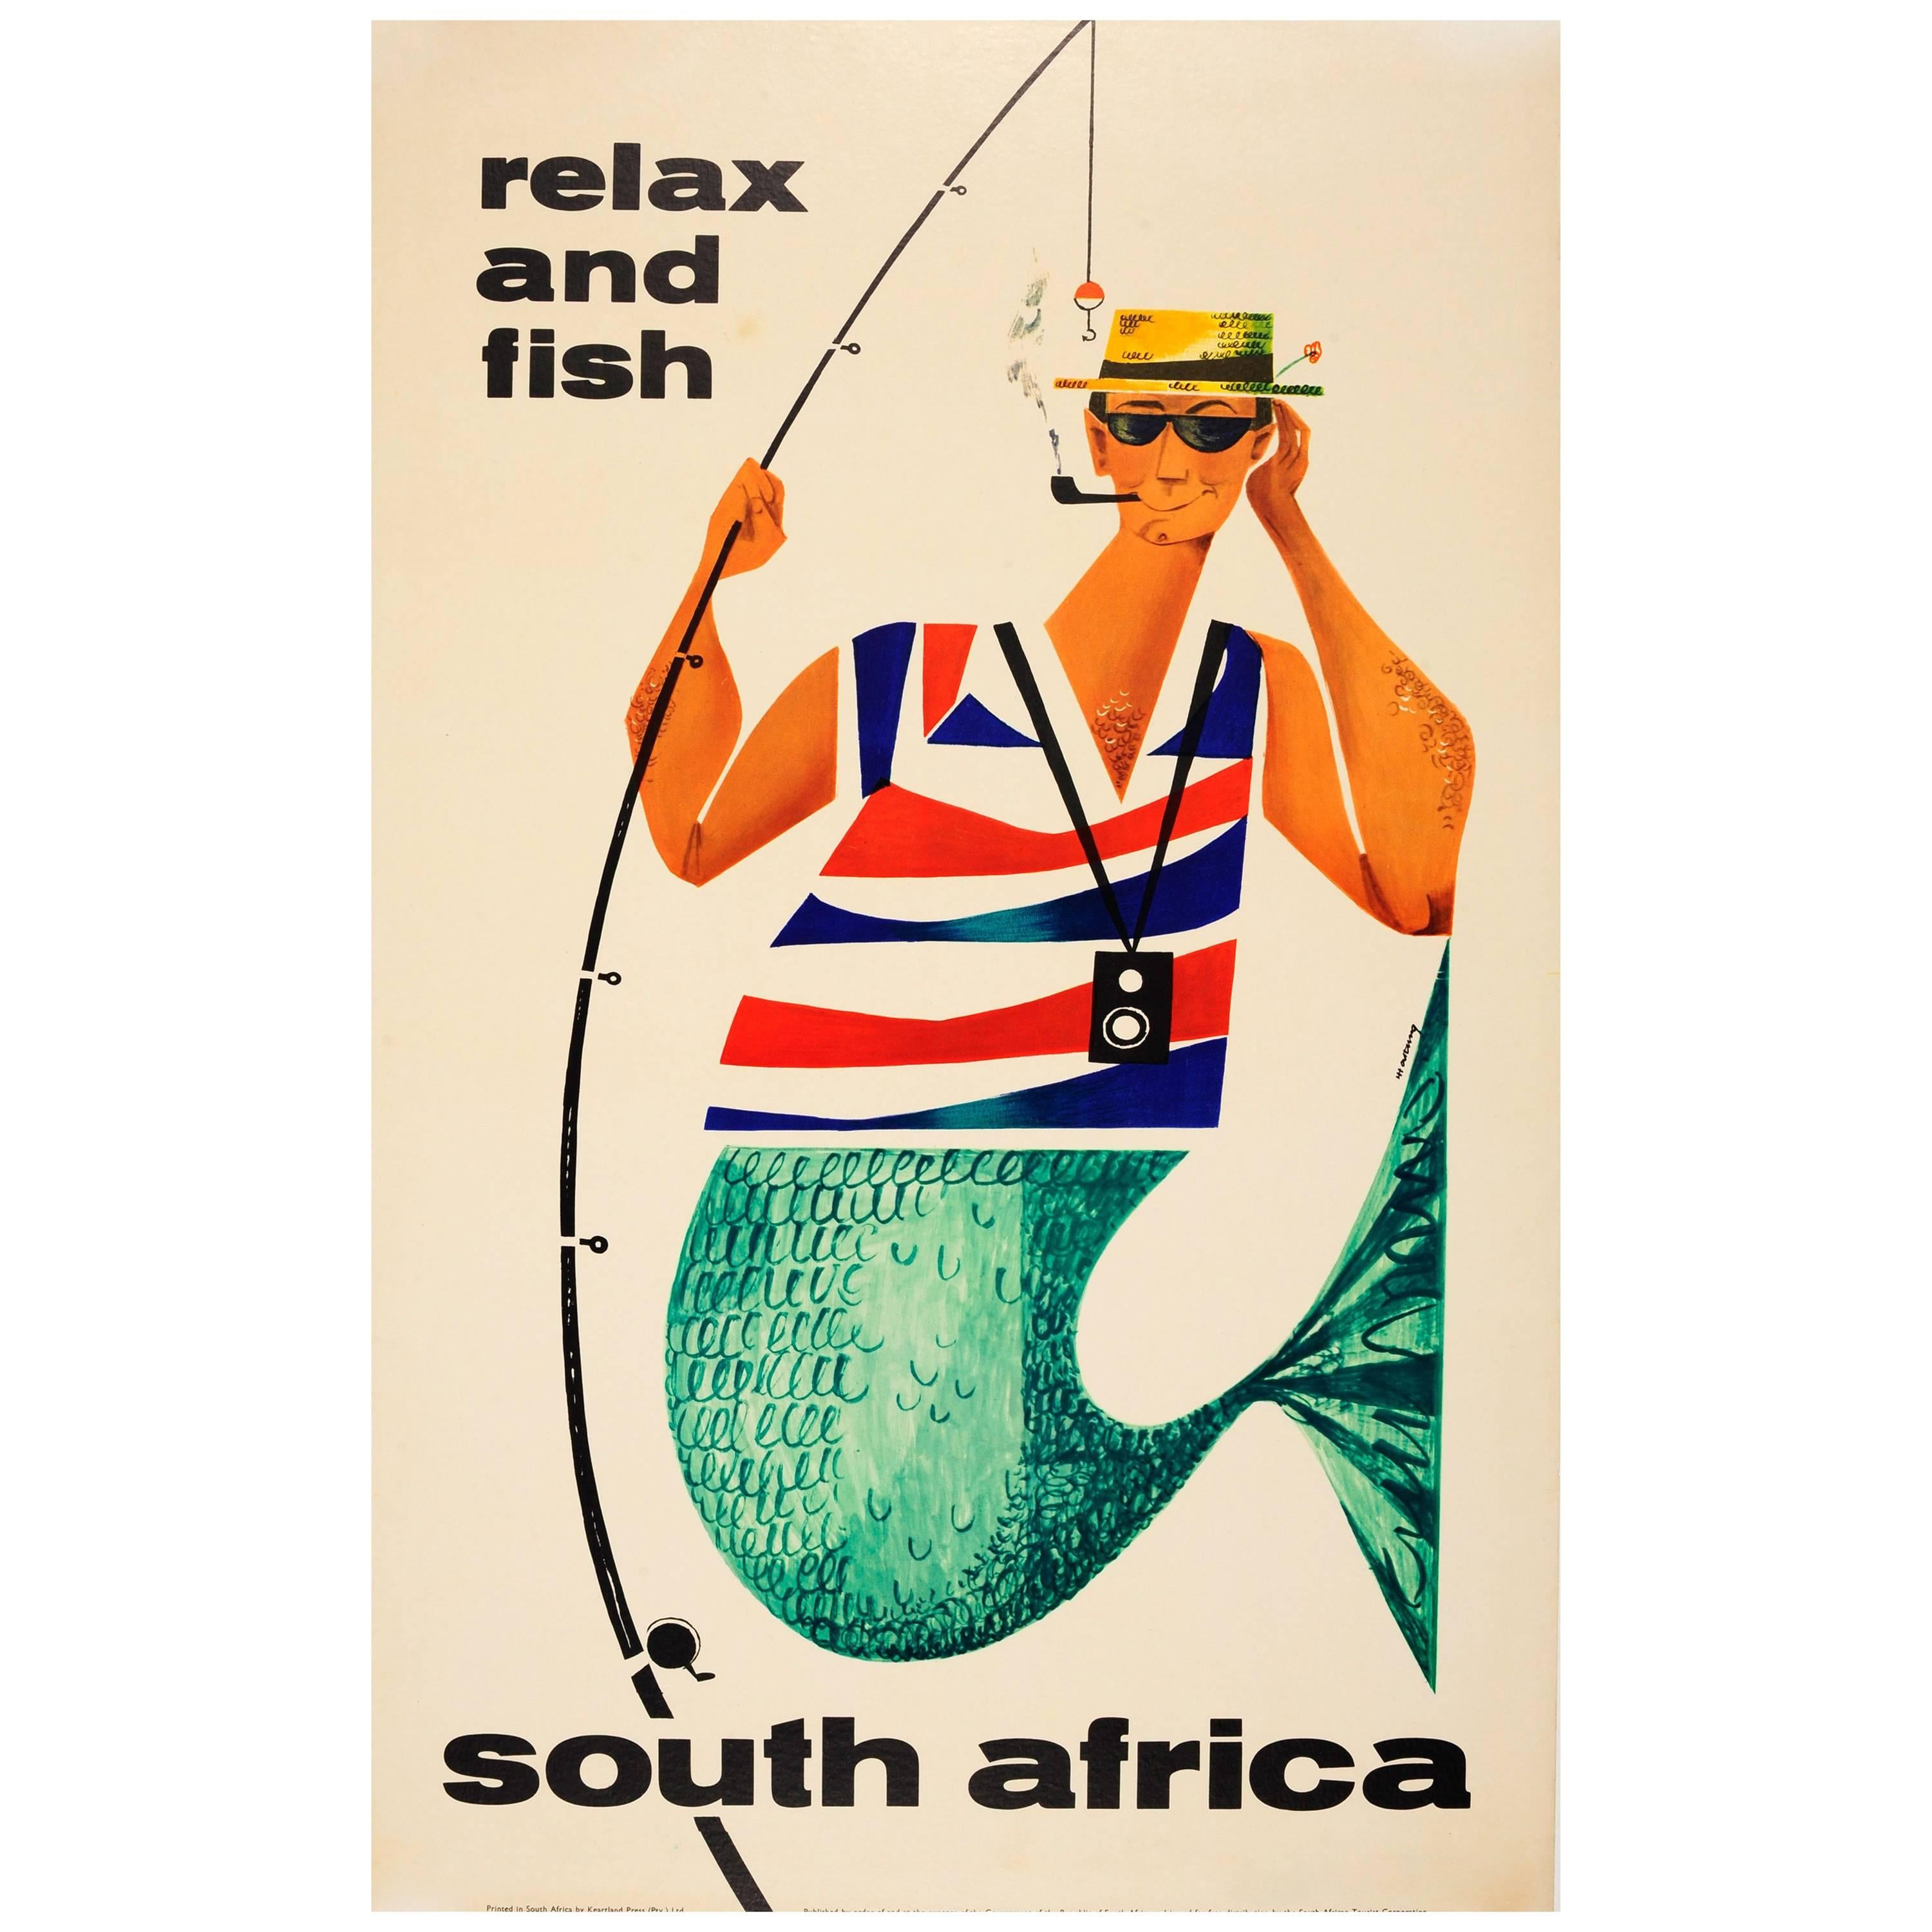 Original Vintage Travel Advertising Poster, Relax and Fish South Africa